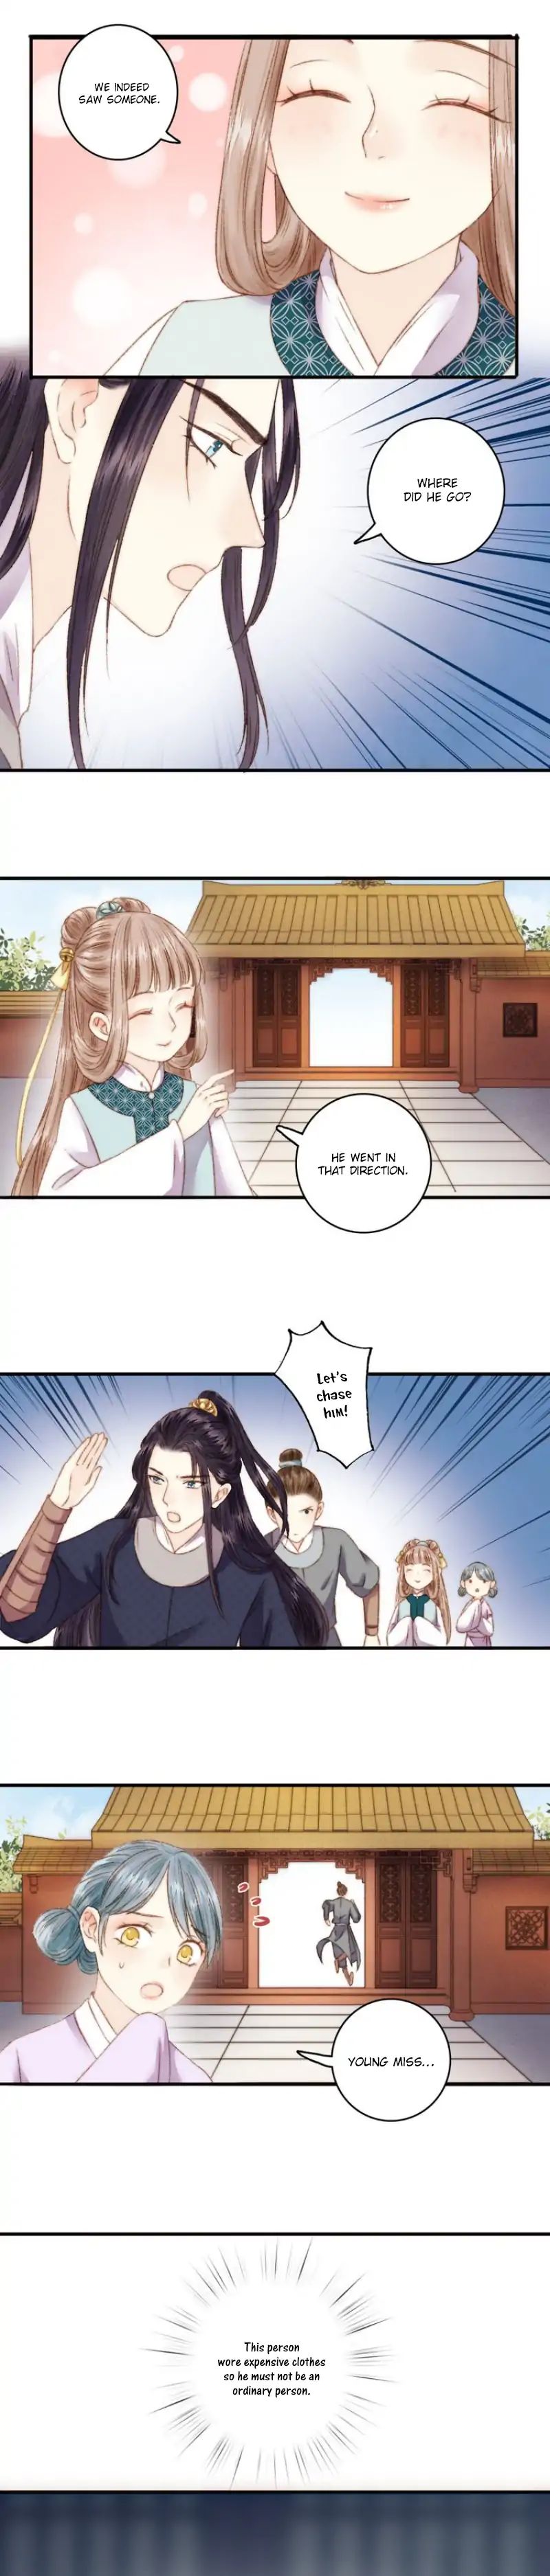 The Goddess of Healing chapter 4